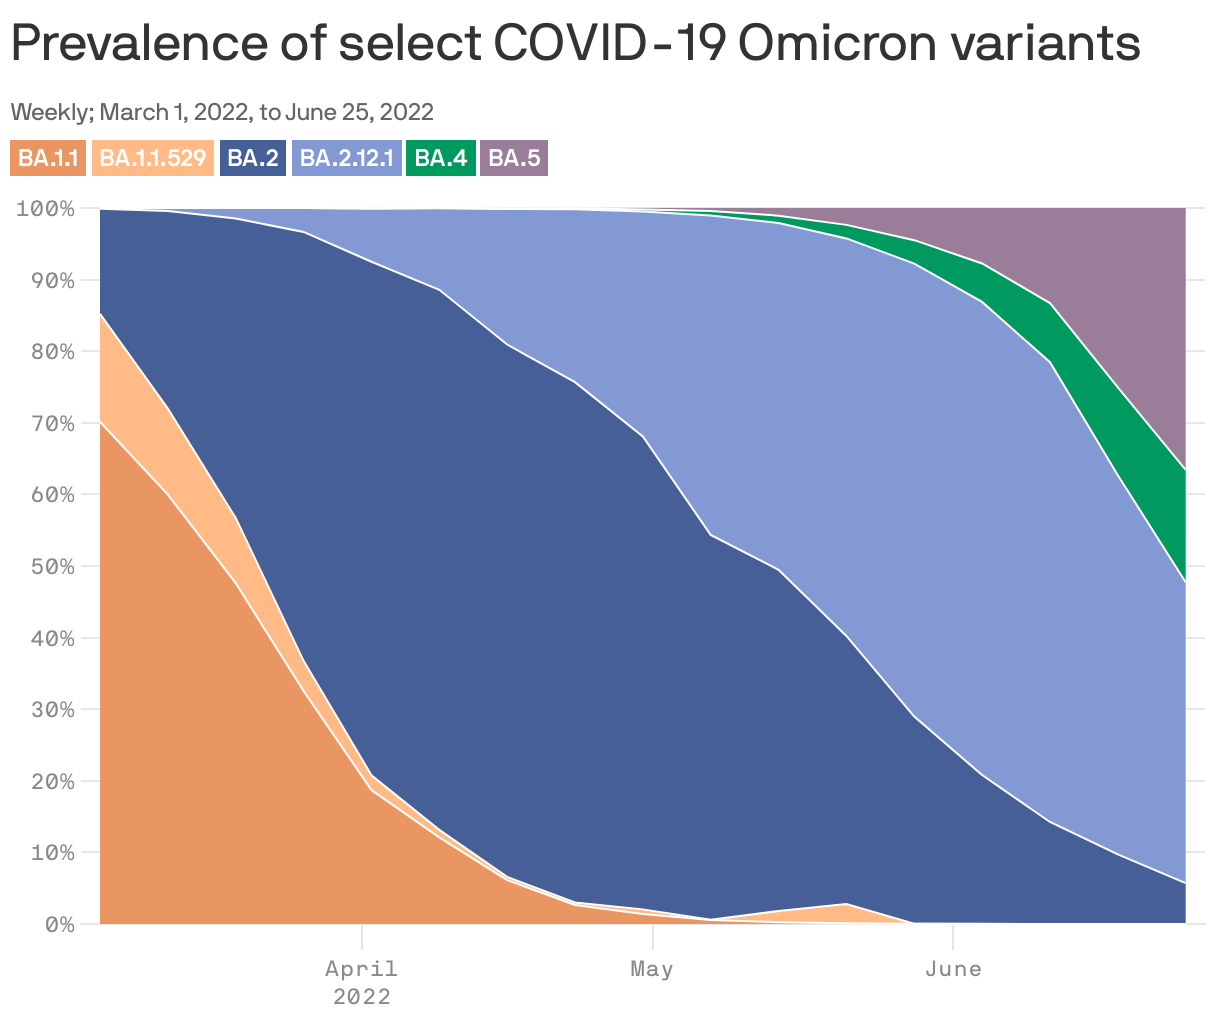 Prevalence of select COVID-19 Omicron variants